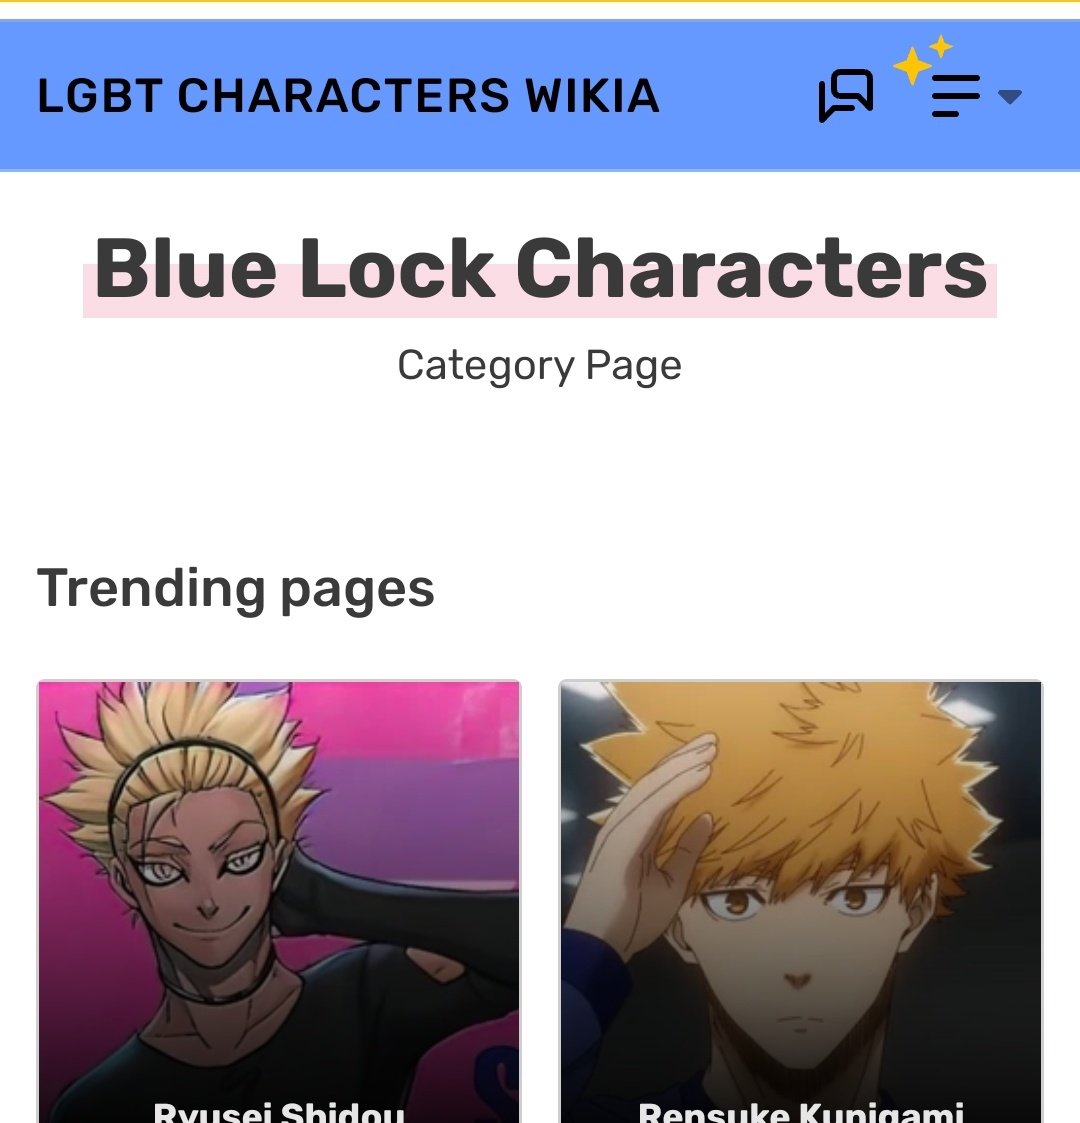 Category:Blue Lock Characters, LGBT Characters Wikia